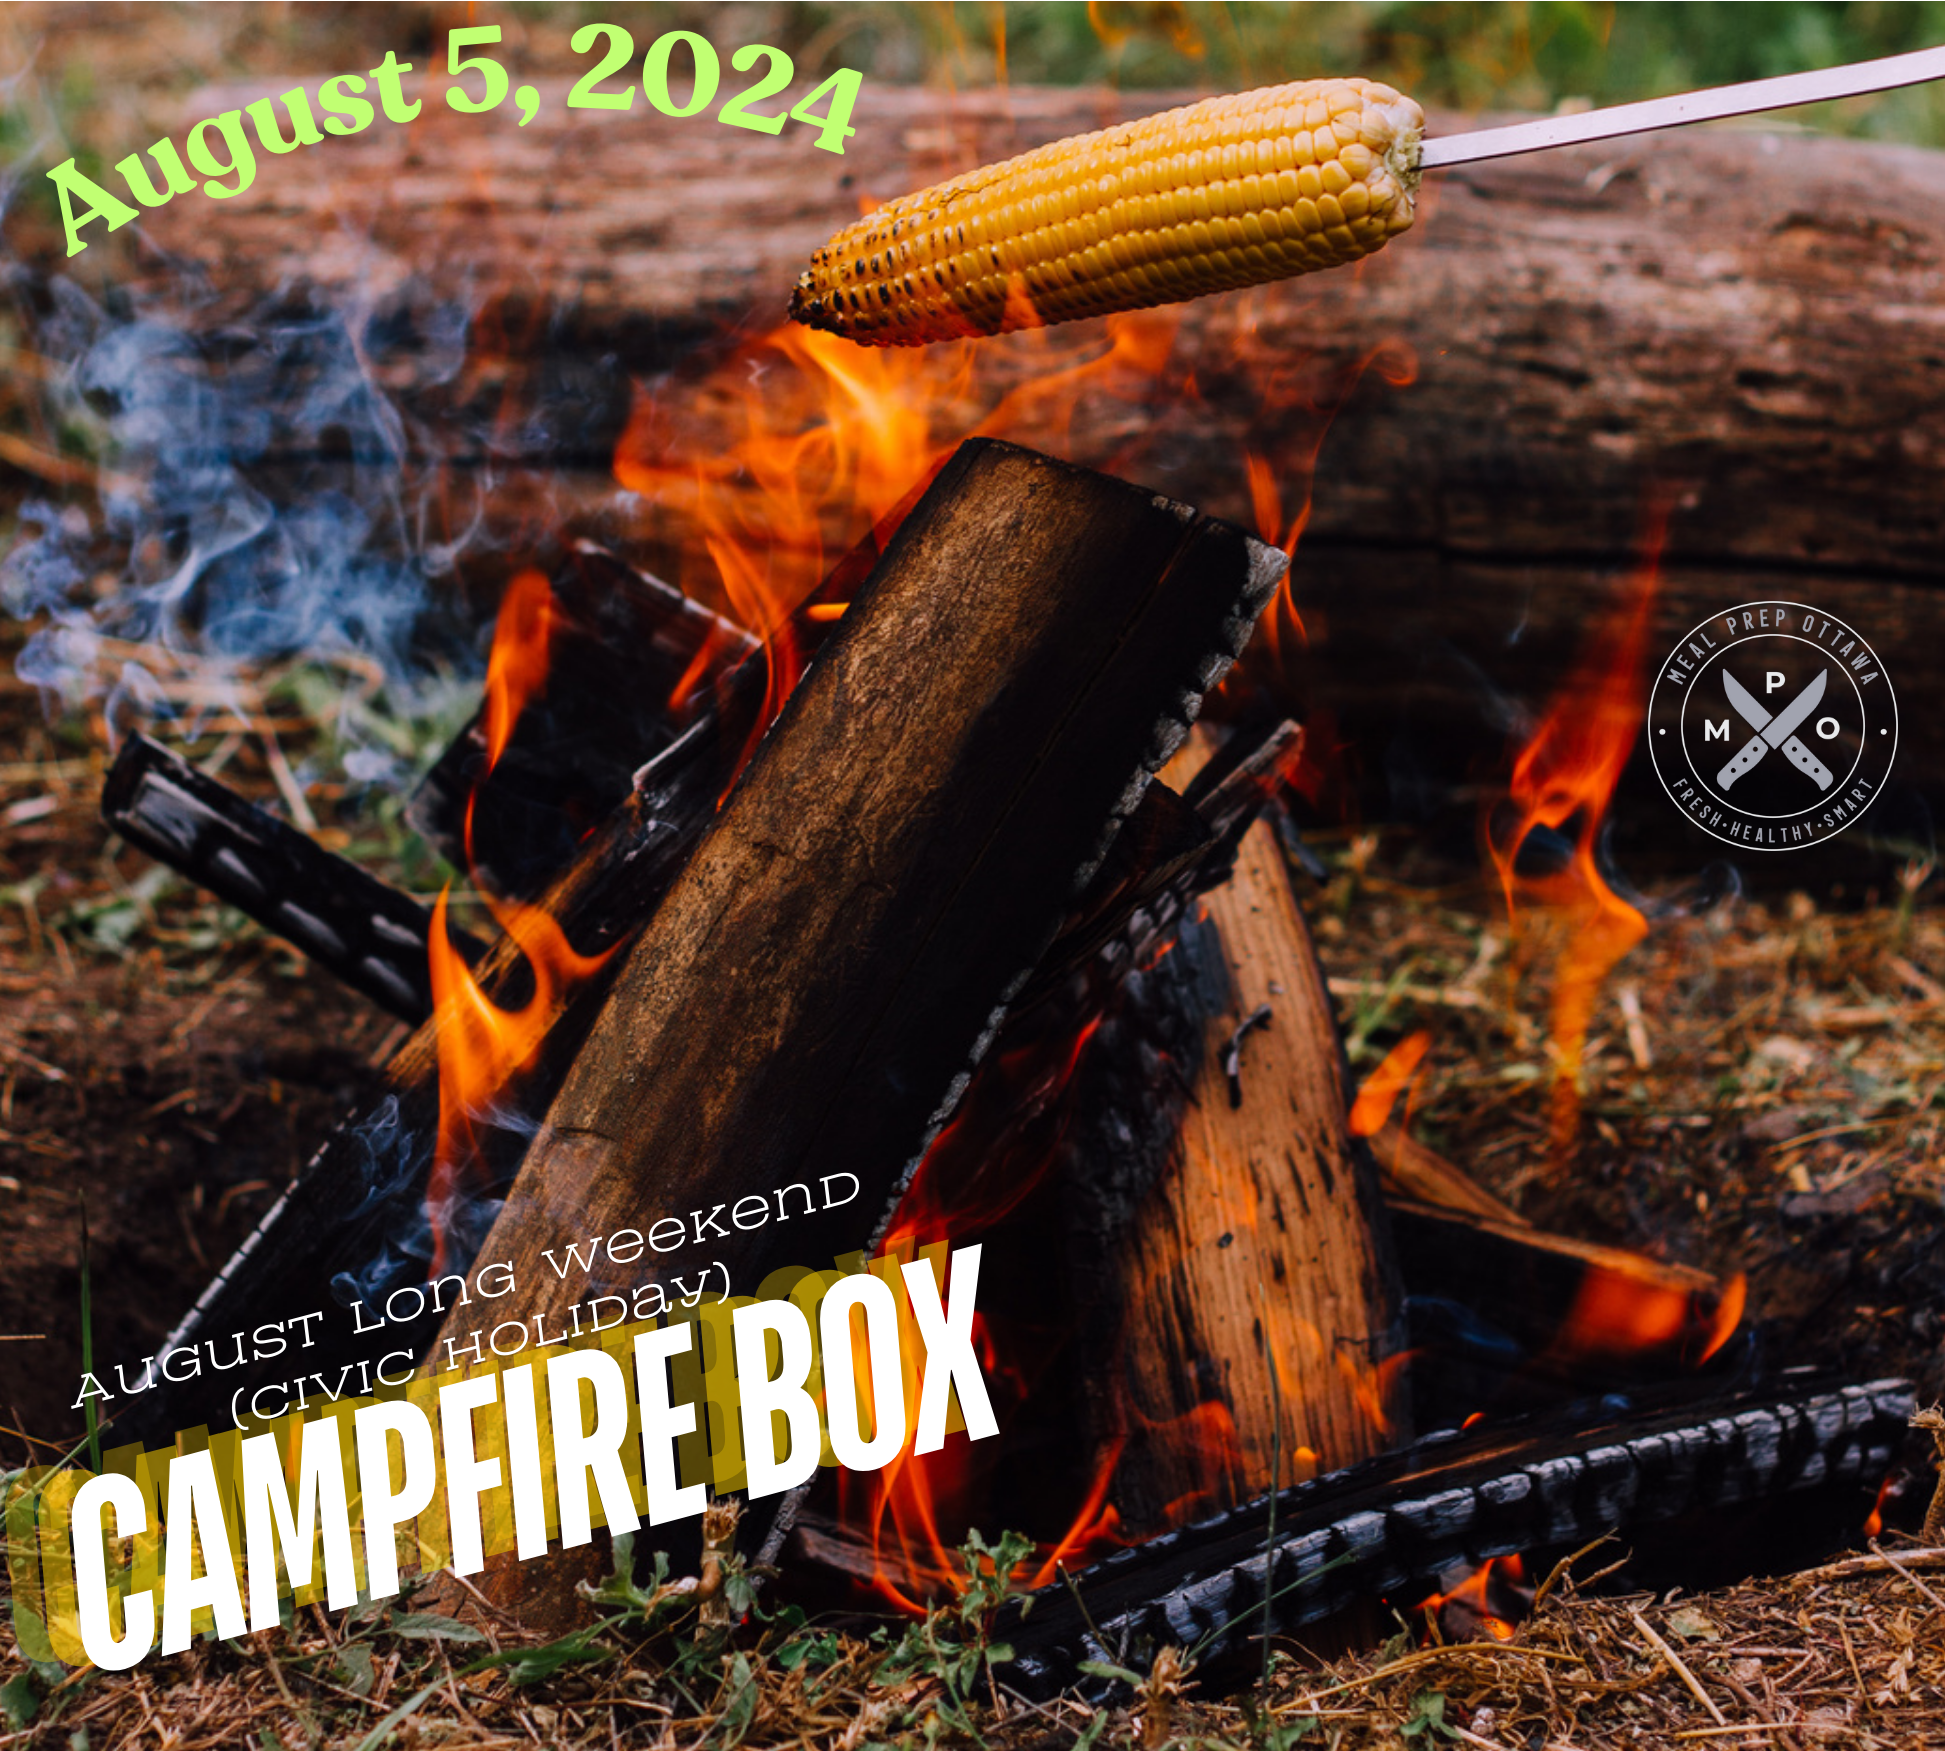 MPO Campfire Box - August 4th Only (Civic Holiday Weekend)